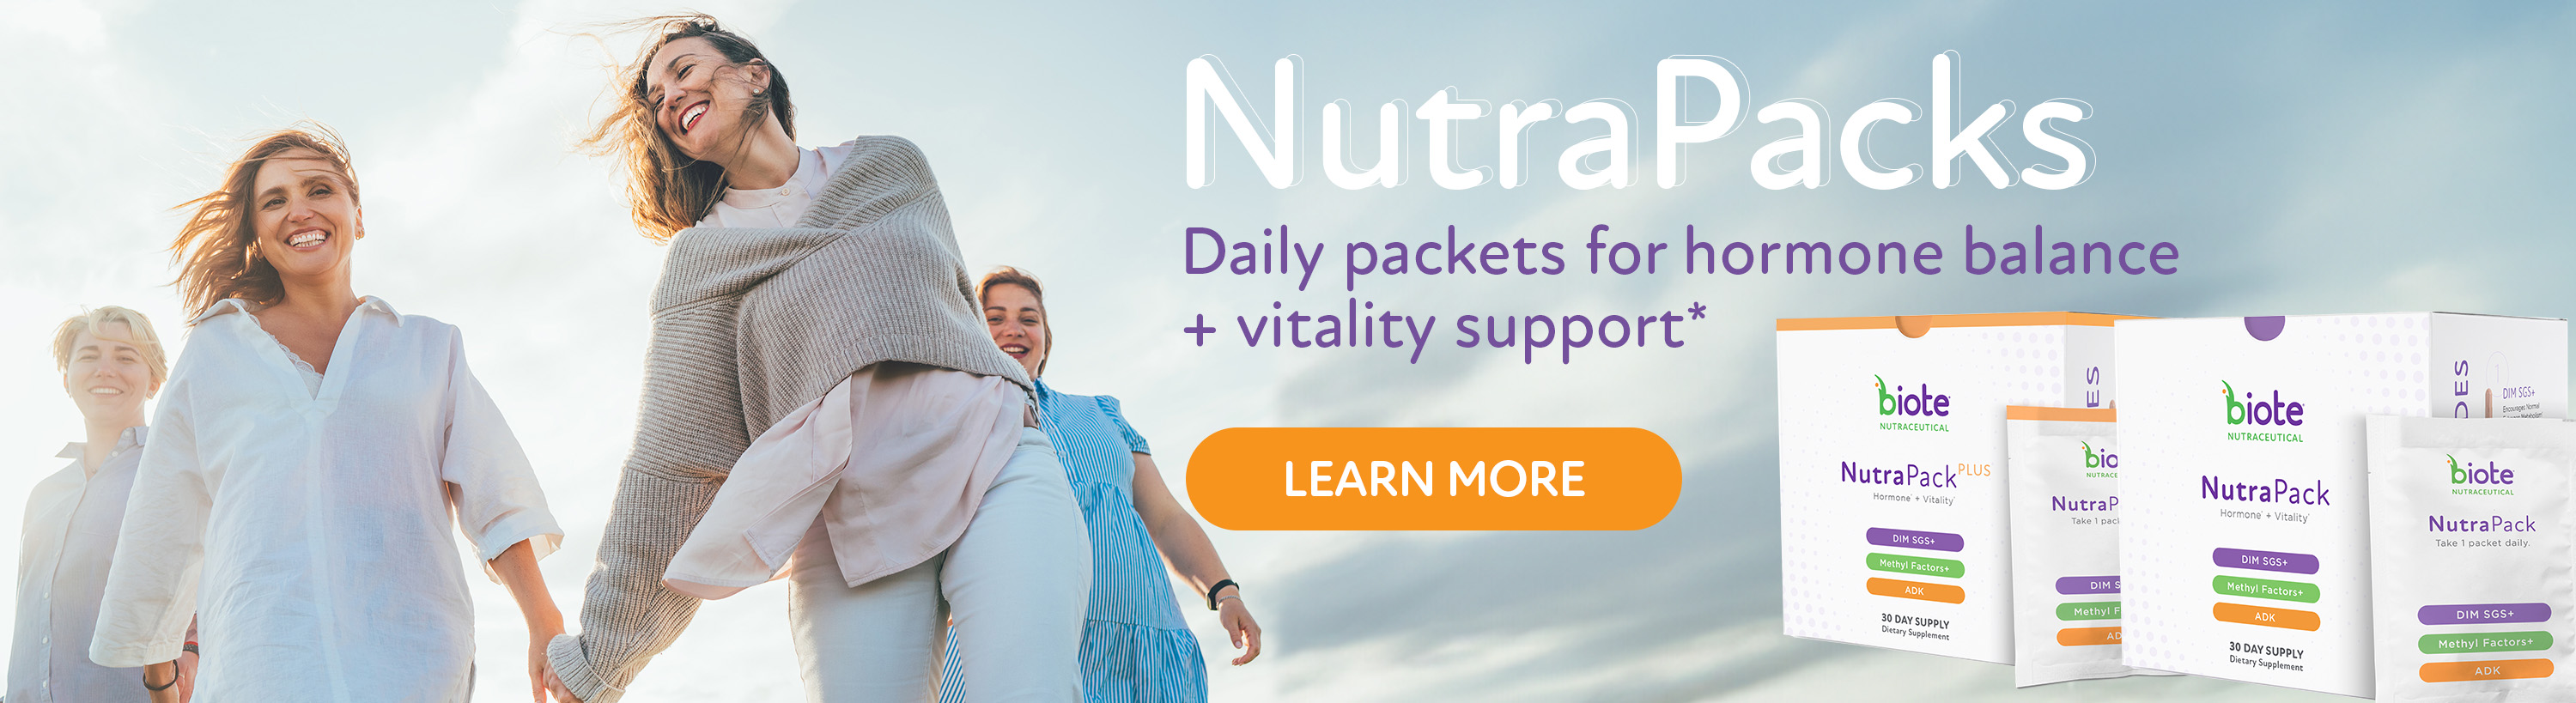 /products/nutraceuticals/nutrapacks.html?internal_ref=slide2_may24nutrapacks